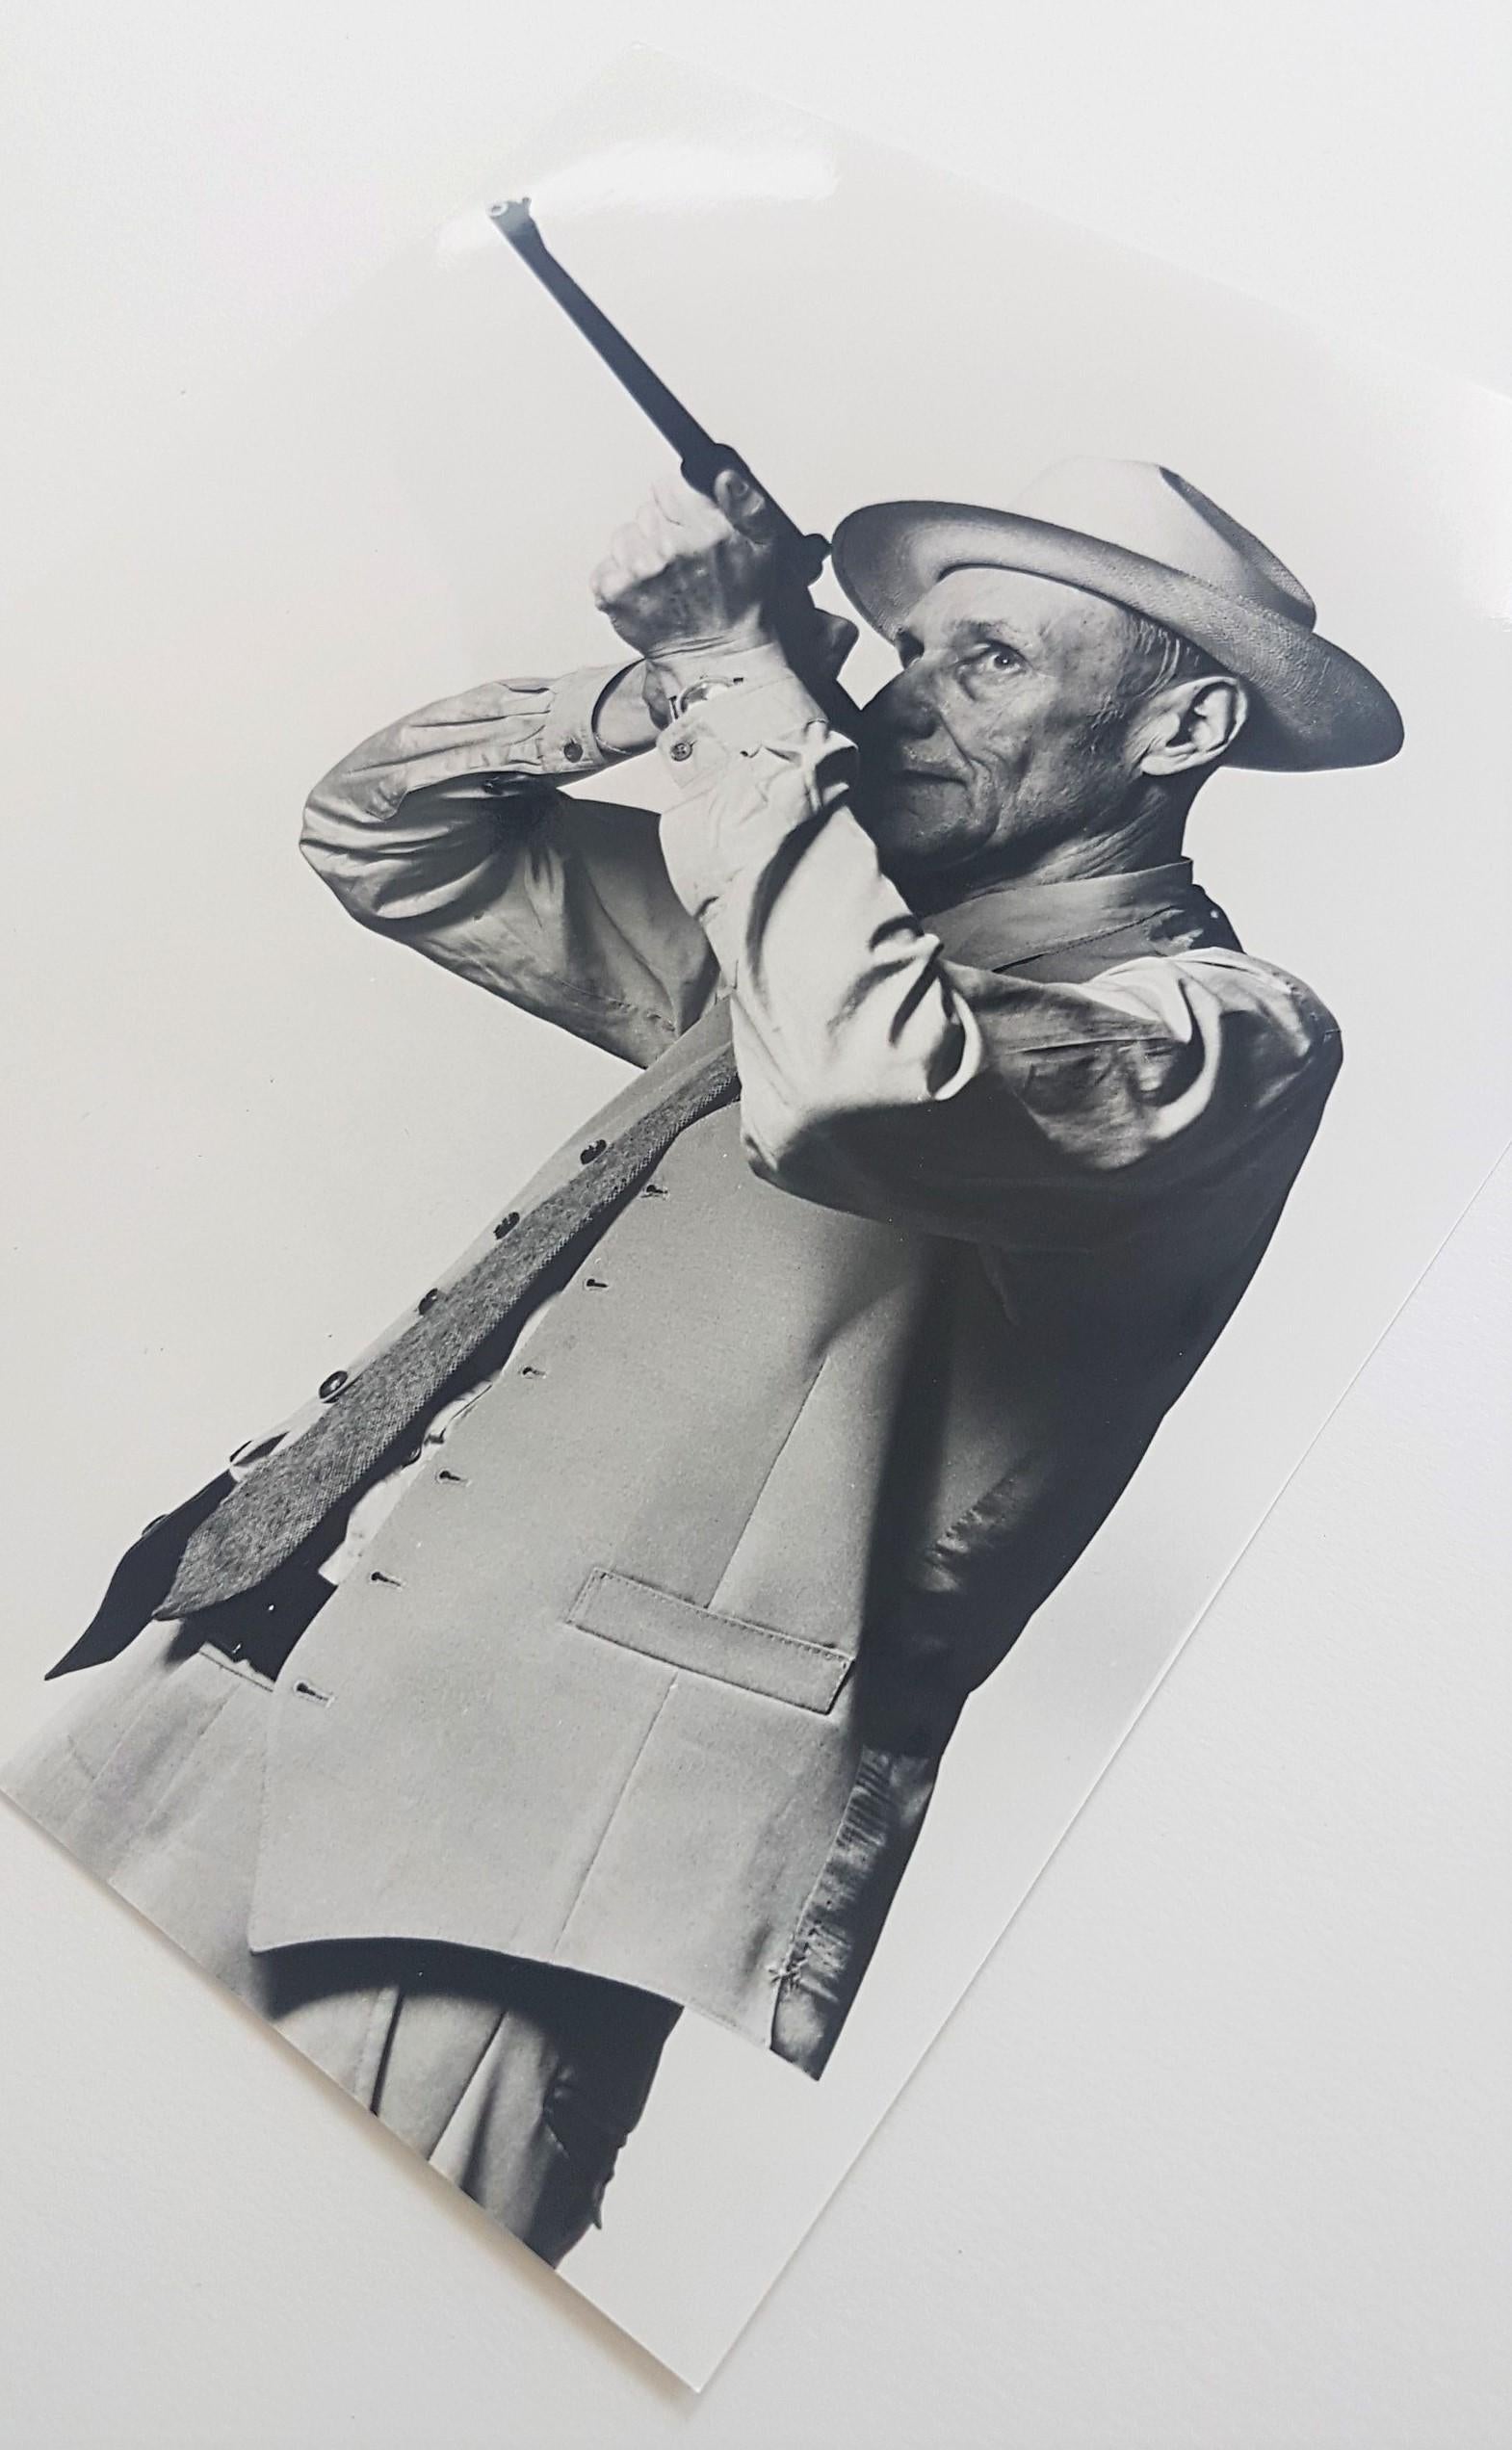 William S. Burroughs (Stamped) (~48% OFF LIST PRICE, LIMITED TIME) - Photograph by Robert Mapplethorpe